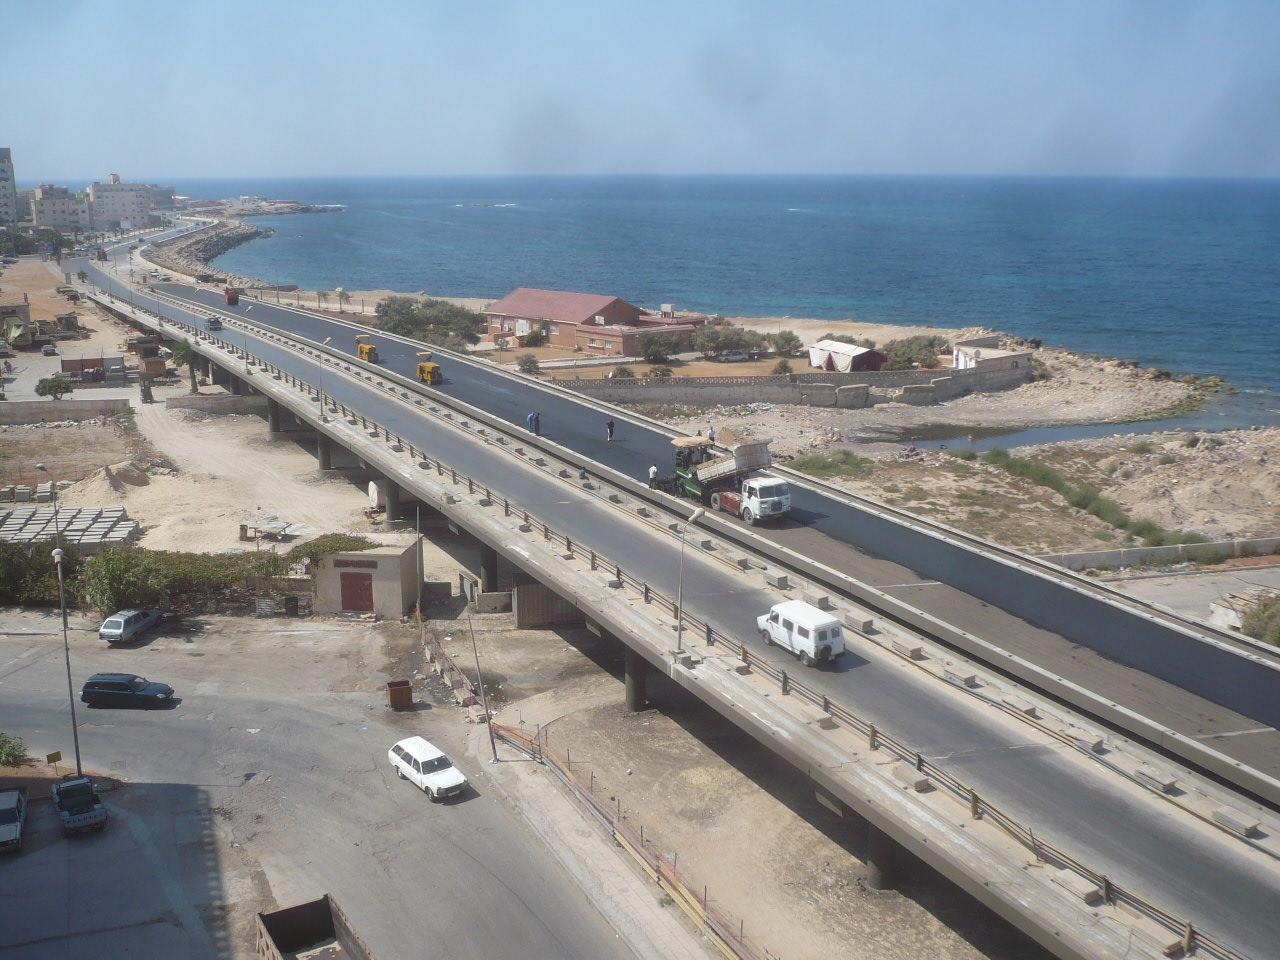 Italy to build Libya’s largest highway linking many countries